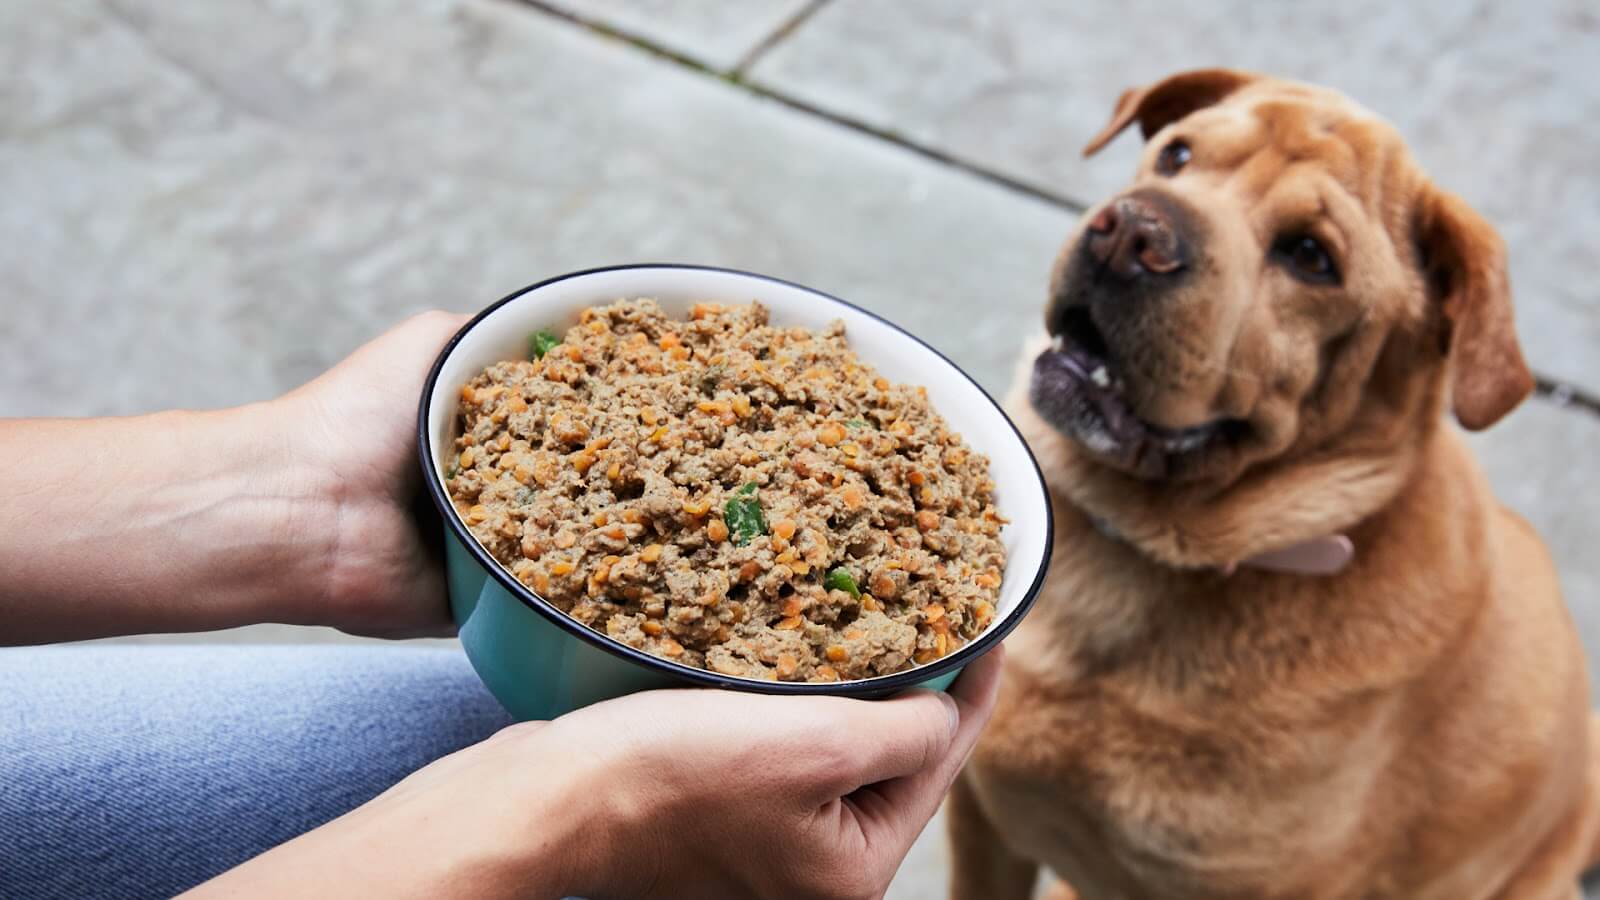 Chicken meal is a commonly used ingredient in pet food